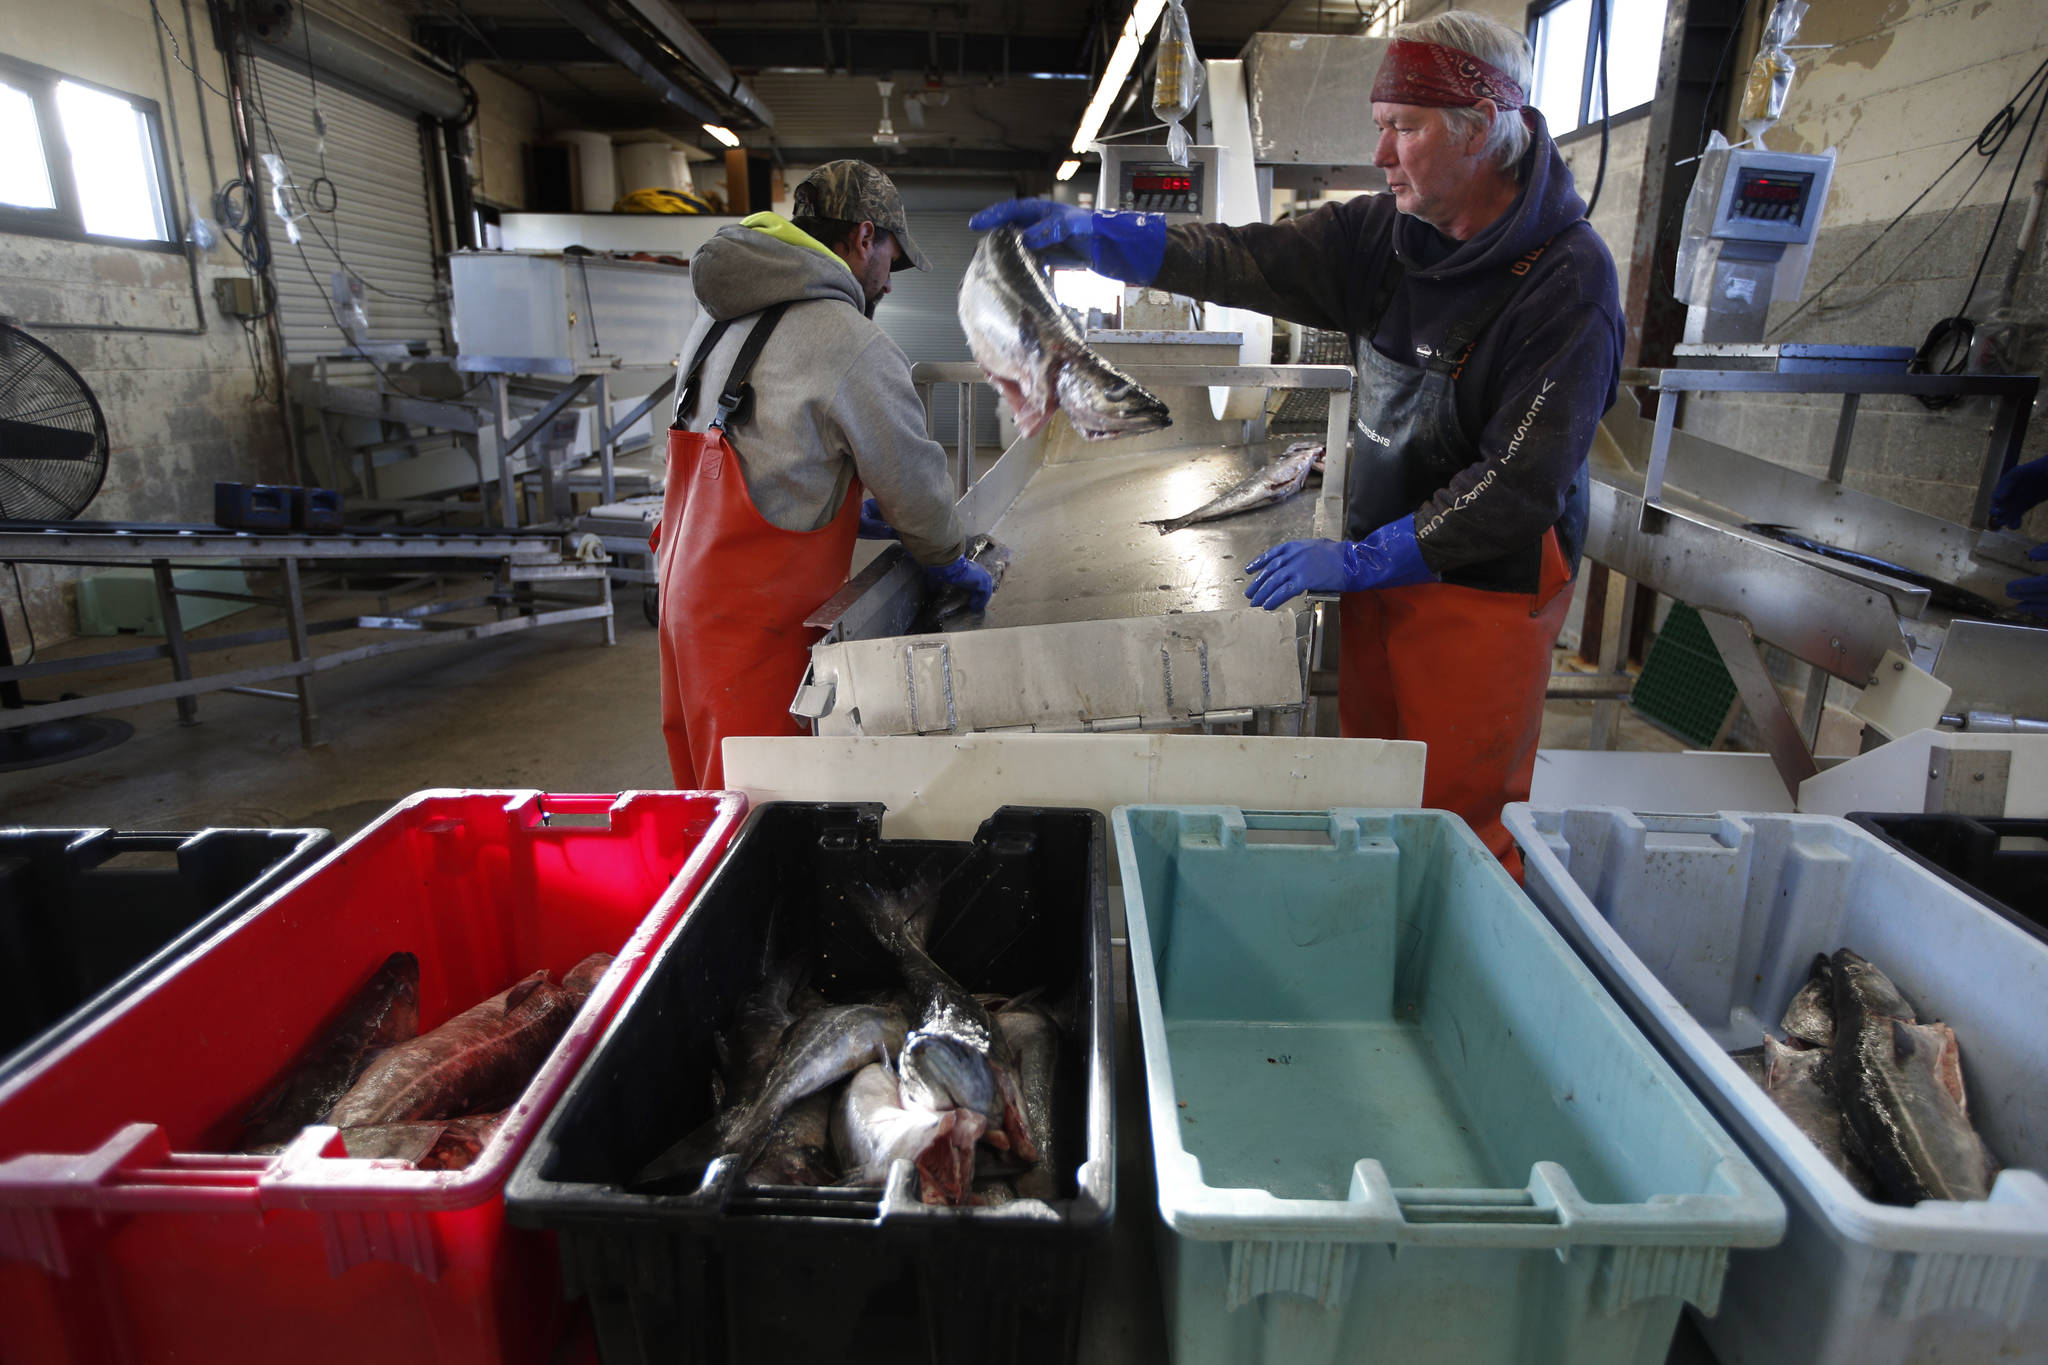 This March 25, 2020, file photo shows a small load of pollack being sorted as it comes off a boat at the Portland Fish Exchange in Portland, Maine. The amount of commercial fishing taking place worldwide has dipped since the start of the coronavirus pandemic, but scientists and conservation experts say it’s unclear if the slowdown will help jeopardized species of sea life to recover. (AP Photo/Robert F. Bukaty)